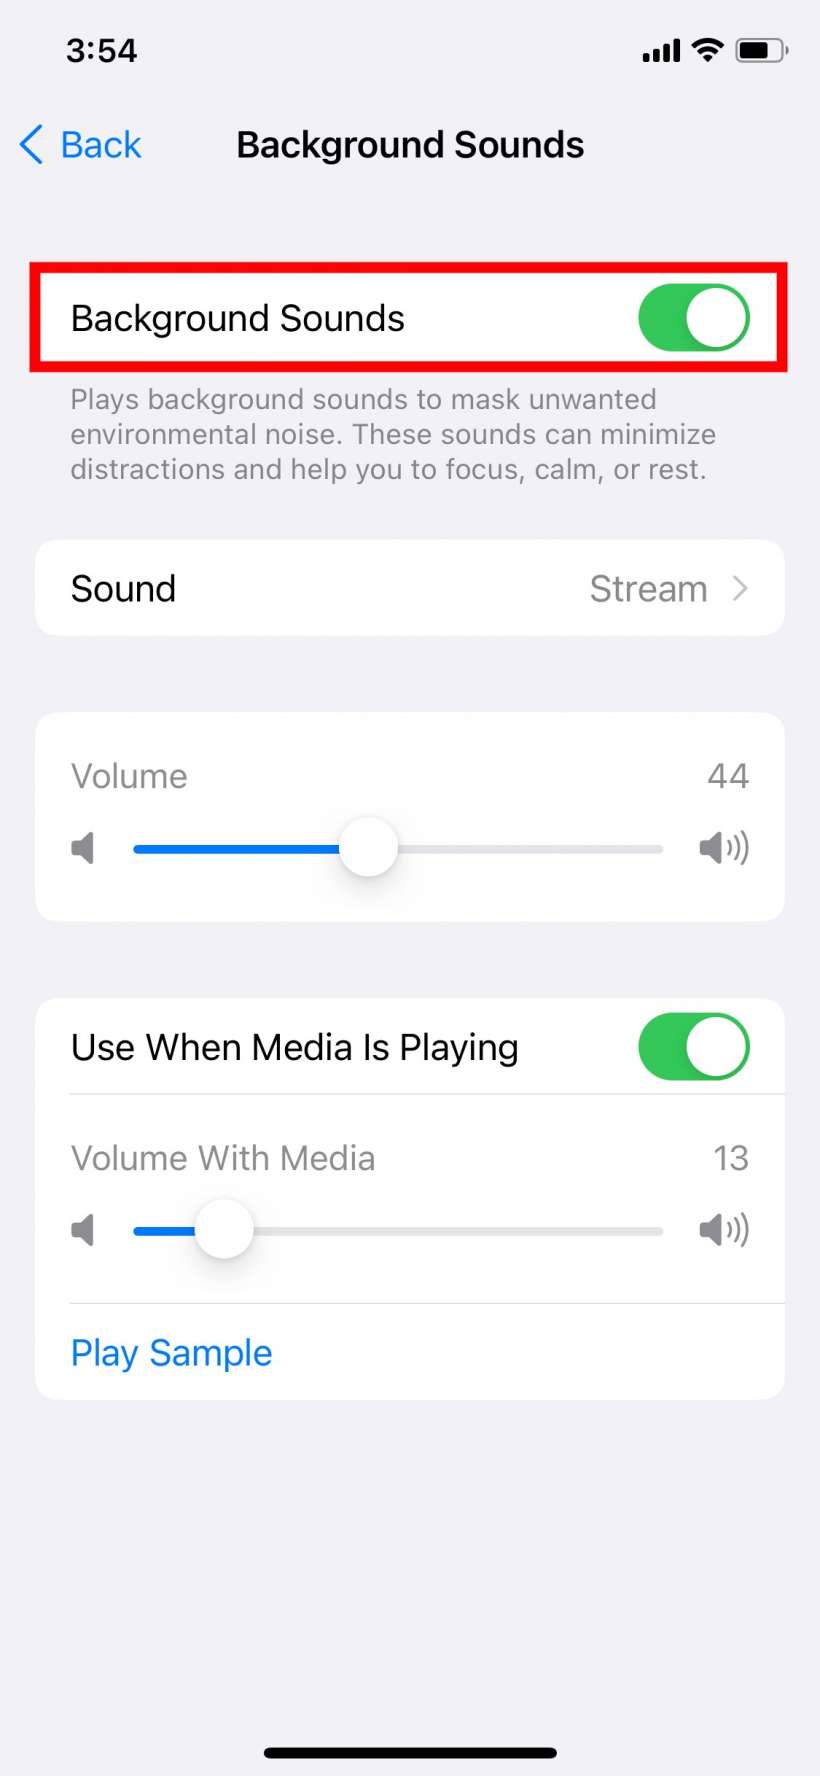 How to use Background Sounds on iPhone and iPad.